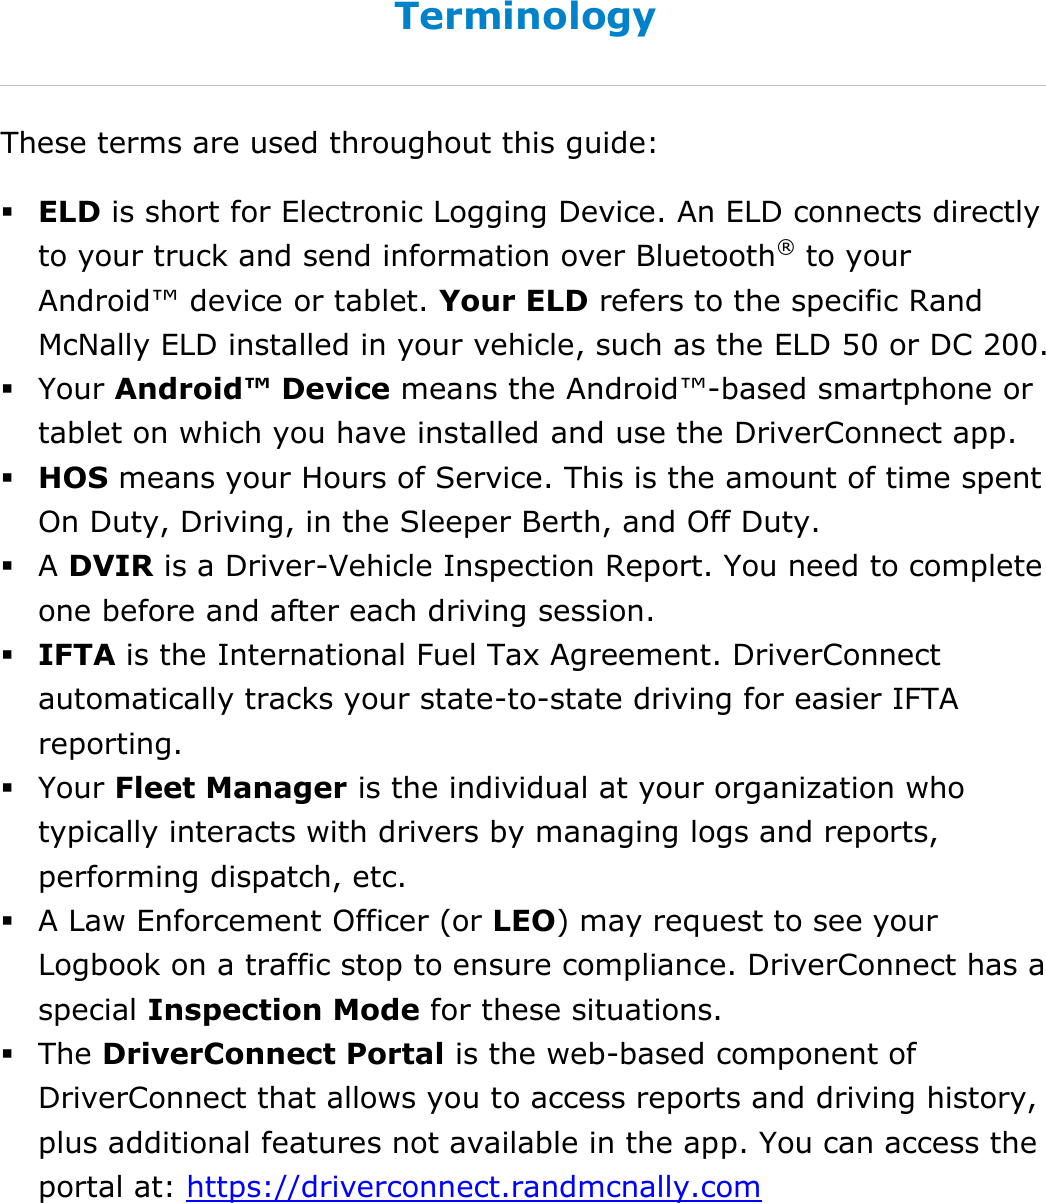 About This Guide DriverConnect User Guide  6 © 2016-2017, Rand McNally, Inc. Terminology These terms are used throughout this guide:  ELD is short for Electronic Logging Device. An ELD connects directly to your truck and send information over Bluetooth® to your Android™ device or tablet. Your ELD refers to the specific Rand McNally ELD installed in your vehicle, such as the ELD 50 or DC 200.  Your Android™ Device means the Android™-based smartphone or tablet on which you have installed and use the DriverConnect app.  HOS means your Hours of Service. This is the amount of time spent On Duty, Driving, in the Sleeper Berth, and Off Duty.  A DVIR is a Driver-Vehicle Inspection Report. You need to complete one before and after each driving session.  IFTA is the International Fuel Tax Agreement. DriverConnect automatically tracks your state-to-state driving for easier IFTA reporting.  Your Fleet Manager is the individual at your organization who typically interacts with drivers by managing logs and reports, performing dispatch, etc.   A Law Enforcement Officer (or LEO) may request to see your Logbook on a traffic stop to ensure compliance. DriverConnect has a special Inspection Mode for these situations.  The DriverConnect Portal is the web-based component of DriverConnect that allows you to access reports and driving history, plus additional features not available in the app. You can access the portal at: https://driverconnect.randmcnally.com  